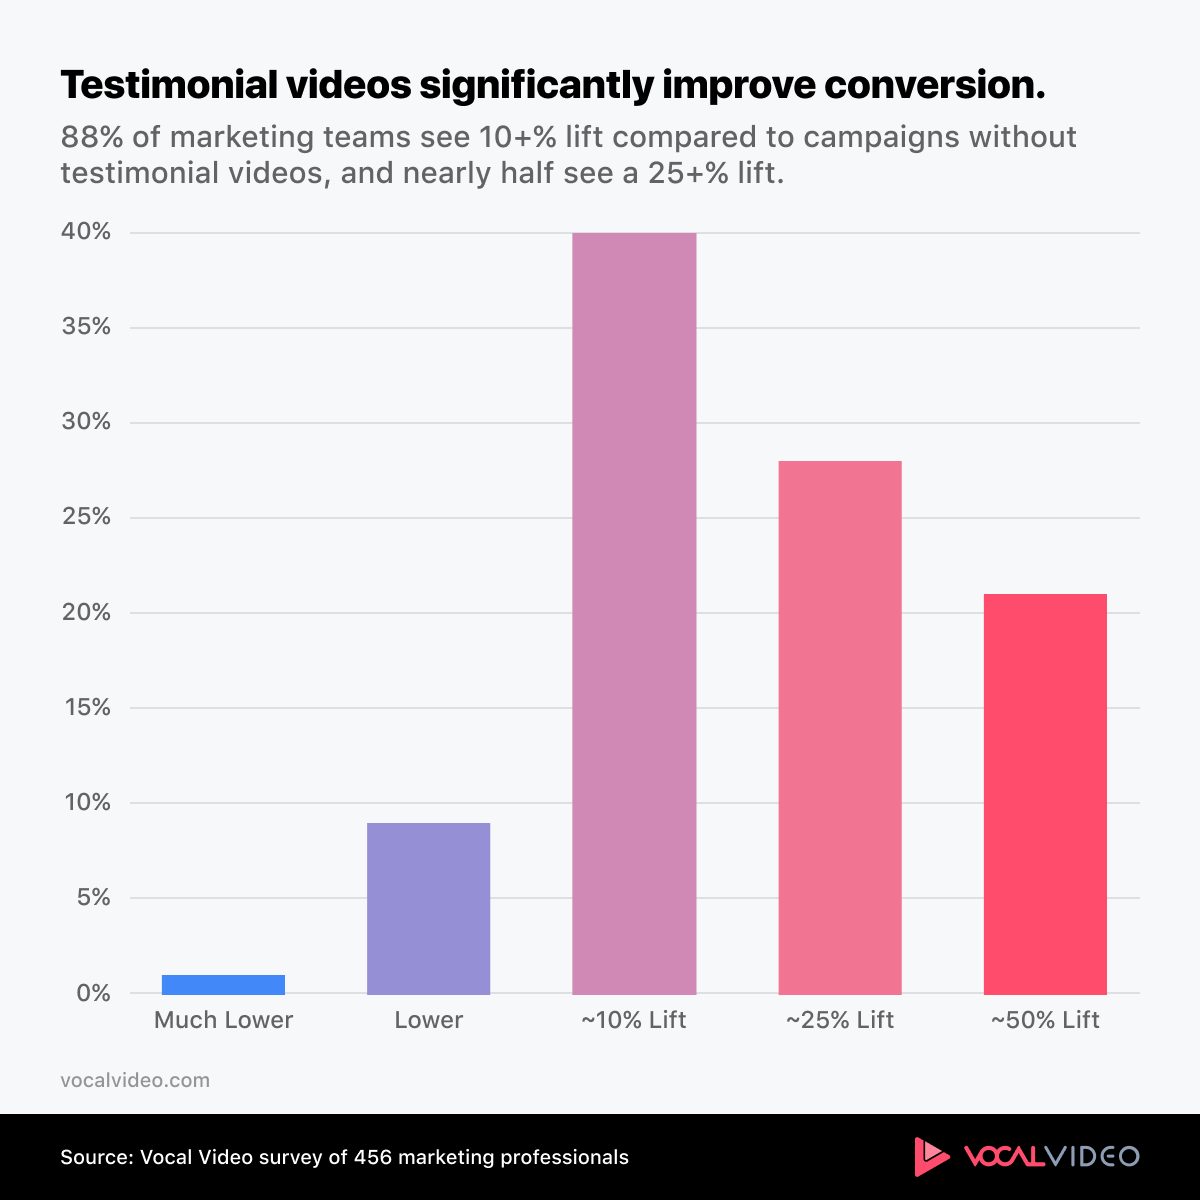 Testimonial videos significantly increase conversion: 88% of marketing teams see a 10+% lift compared to campaigns without testimonial video, and nearly half see a 25+% lift.